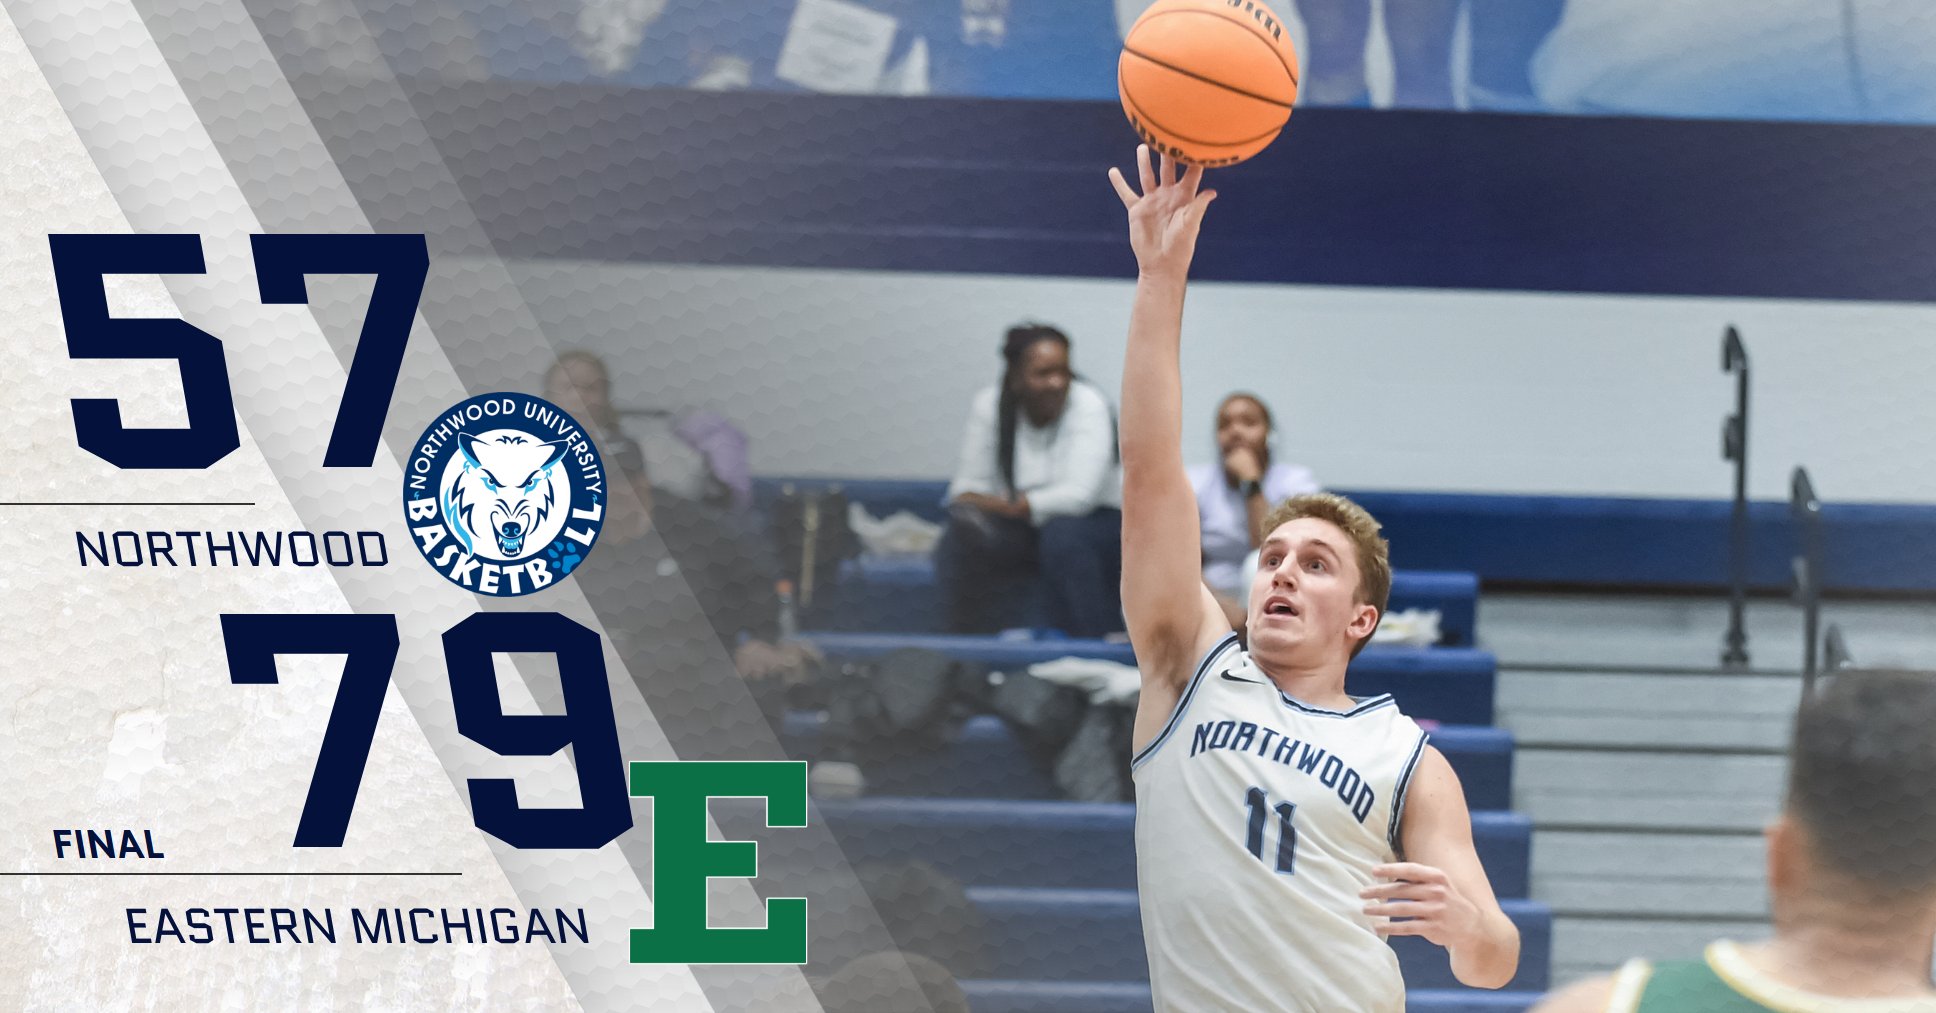 Men's Basketball Loses Exhibition Game At Eastern Michigan 79-57